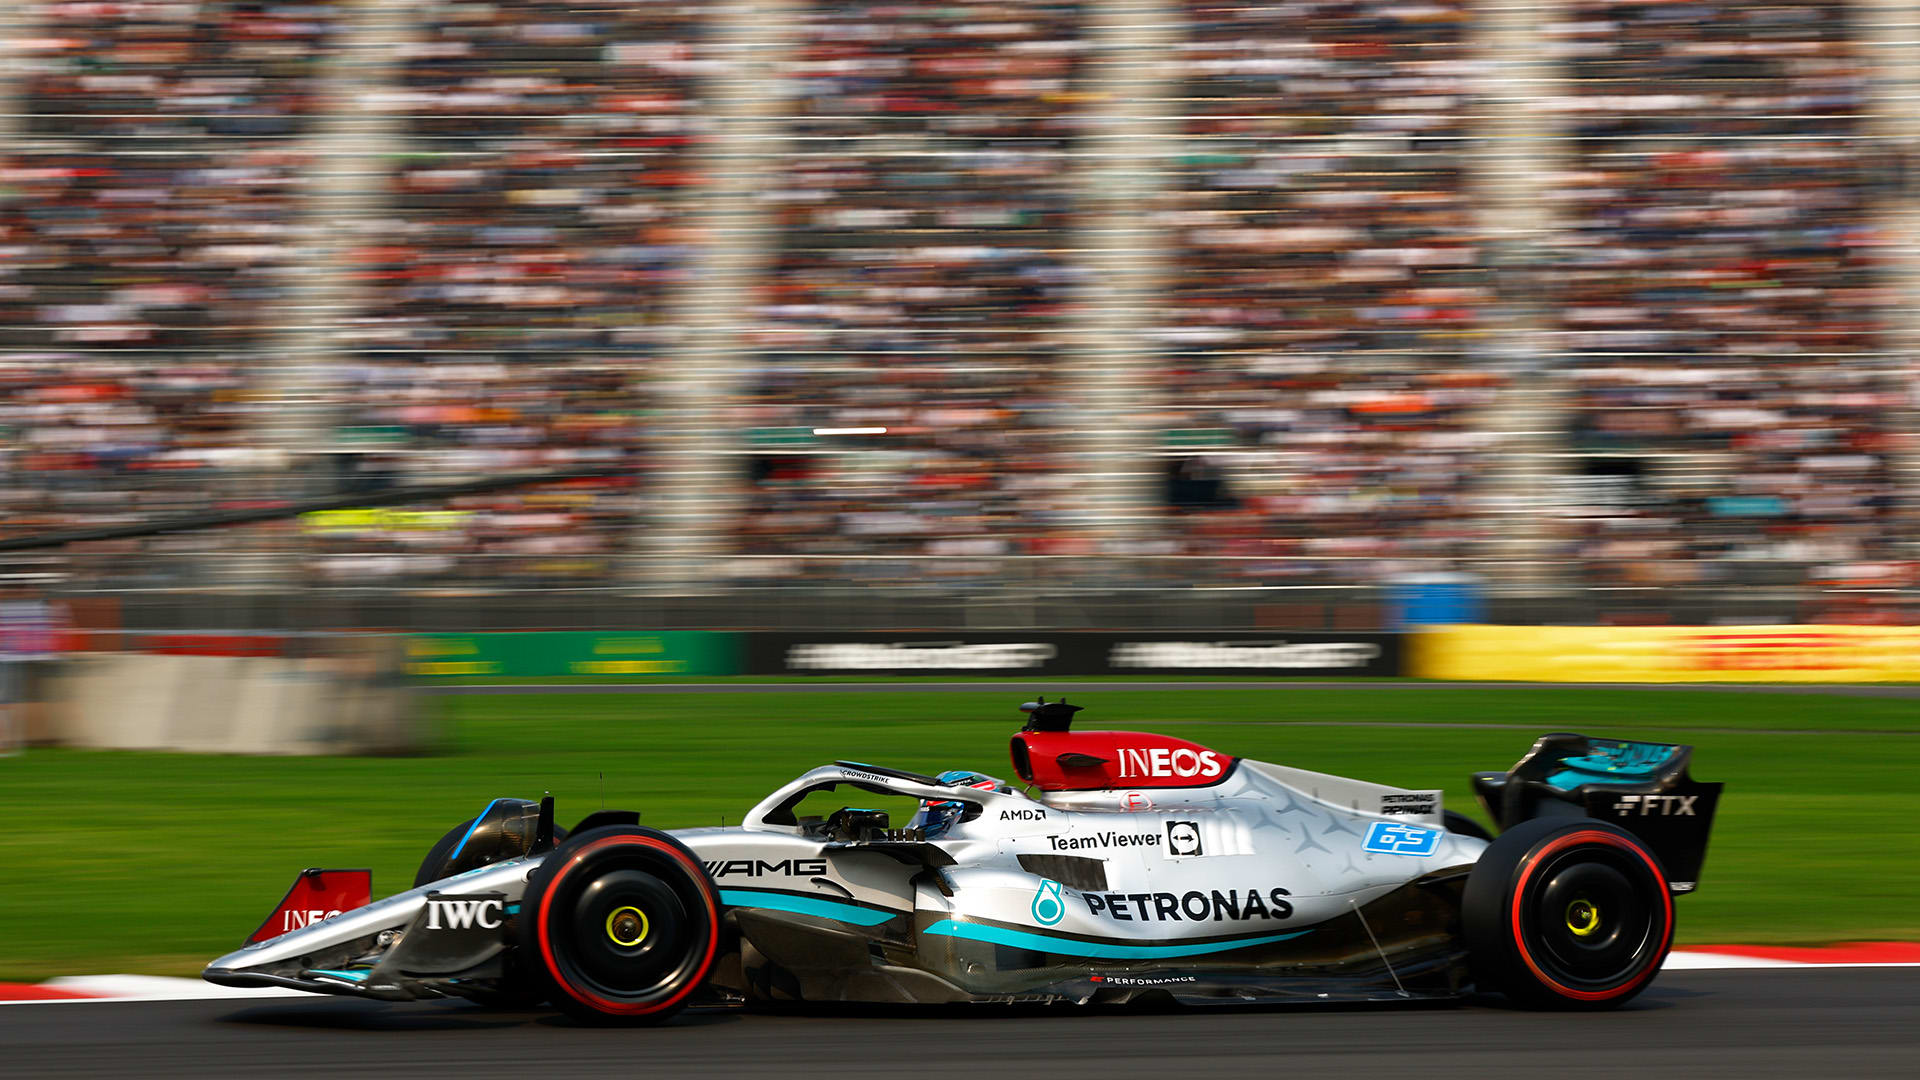 FP2 report and highlights from the 2022 Mexico City Grand Prix Russell heads second practice in Mexico City as Leclerc crashes out Formula 1®